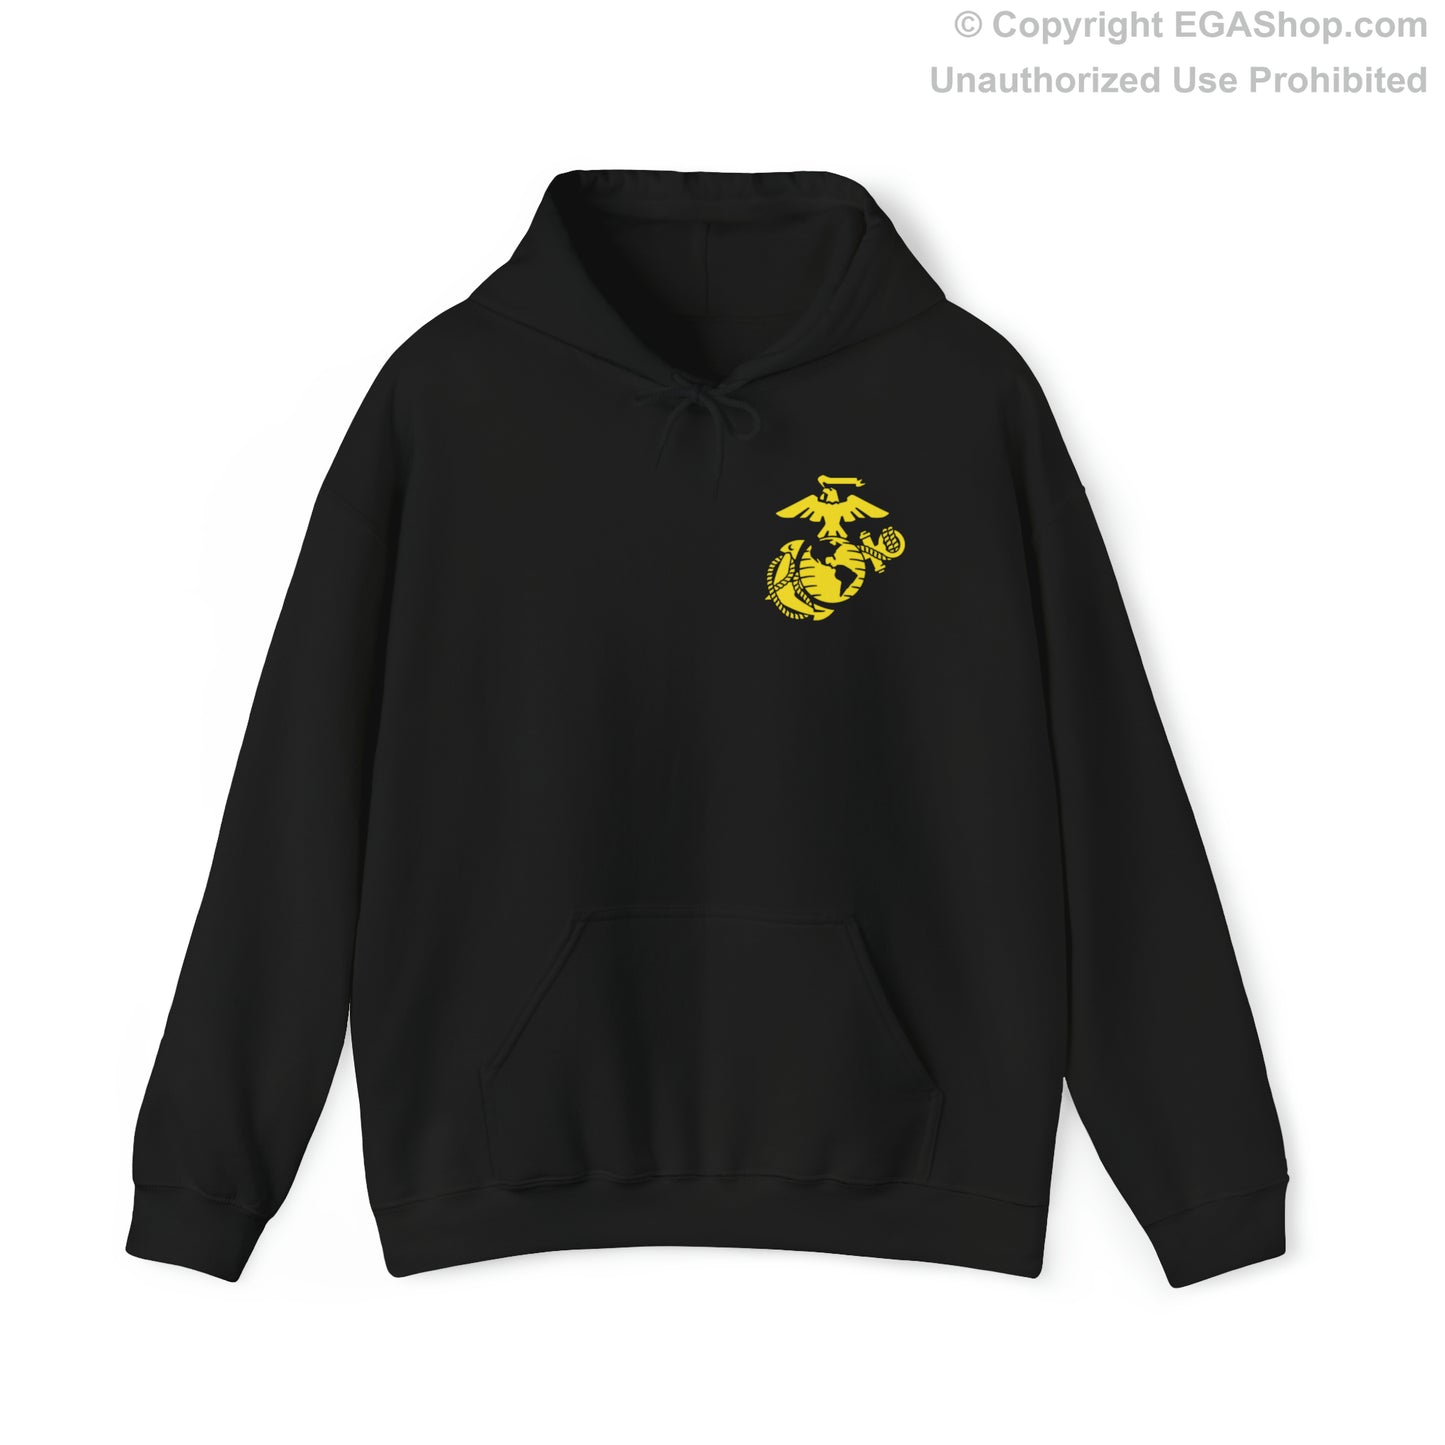 Hoodie: Golf Co. MCRD Parris Island (2nd Battalion Crest on BACK)